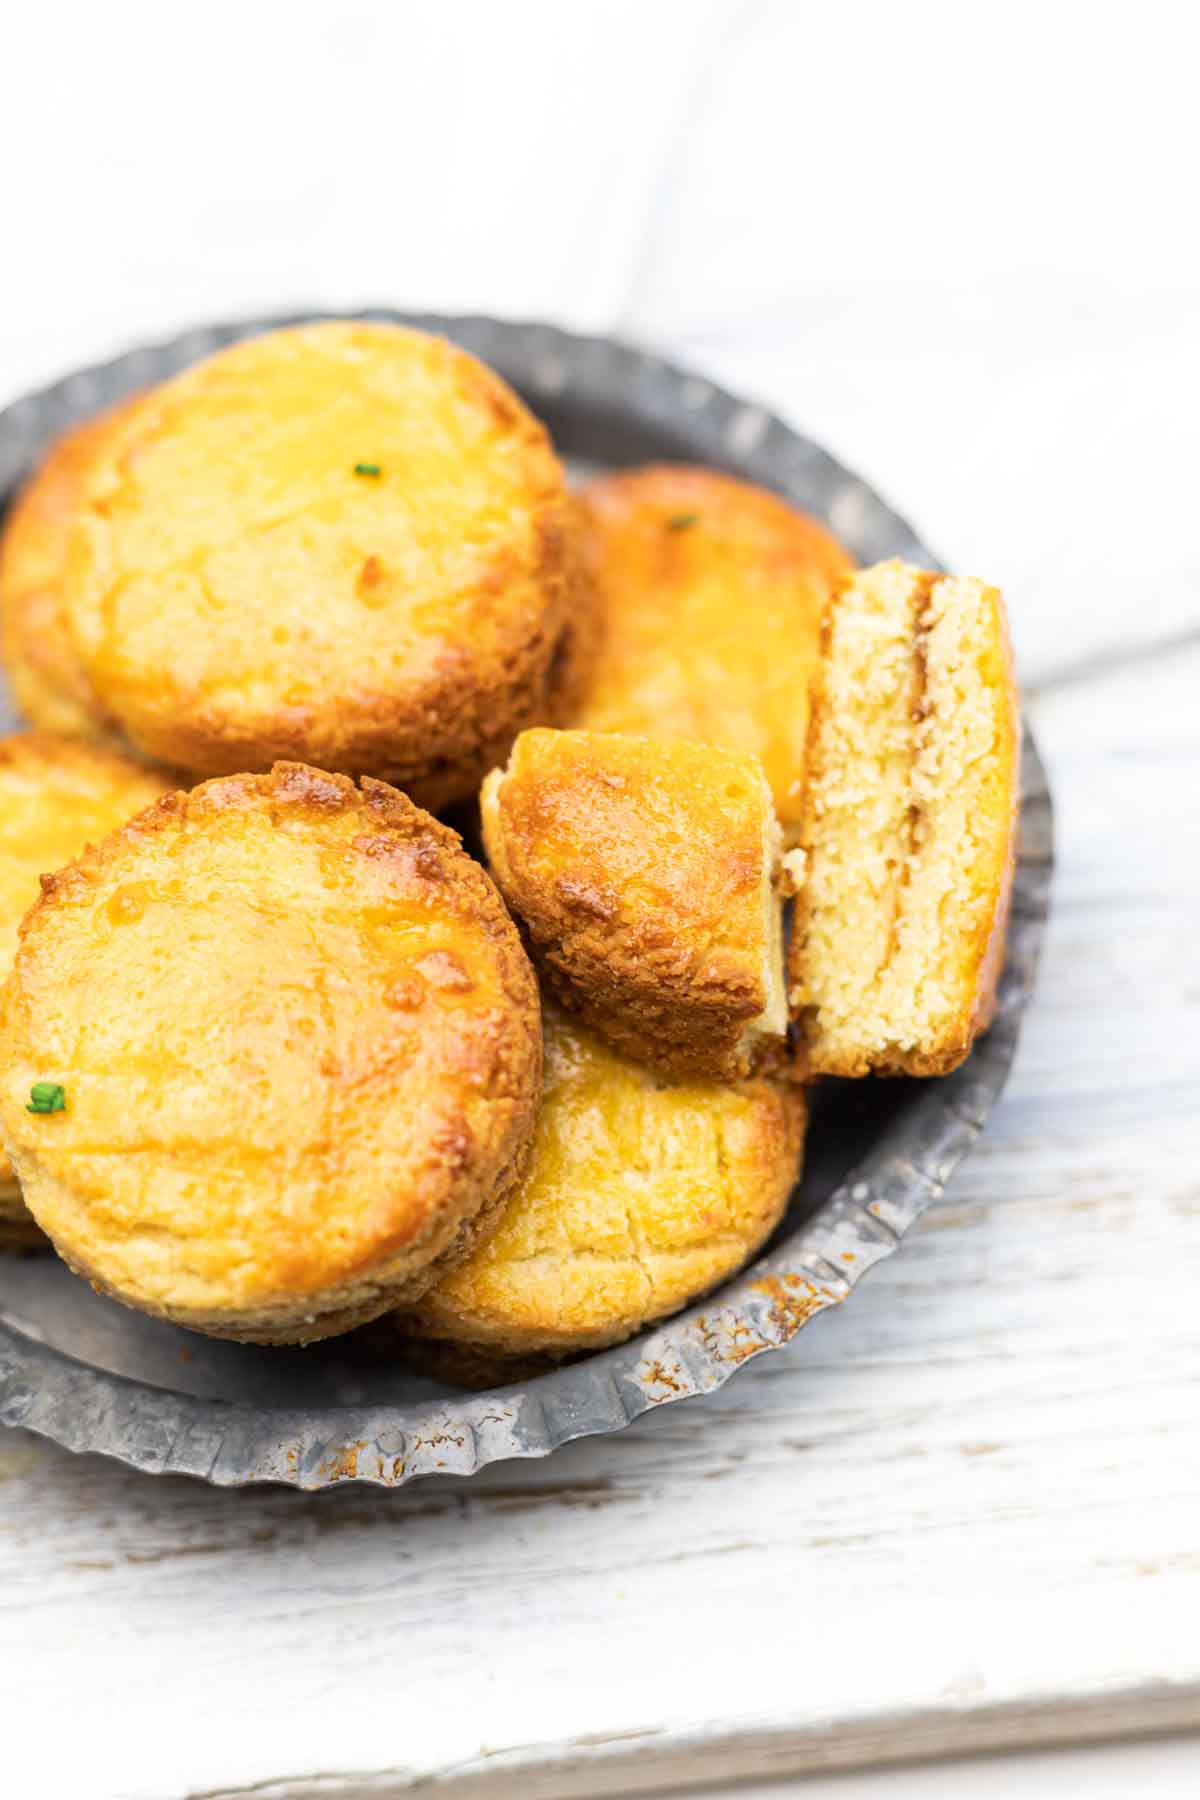 Keto Almond Flour Biscuits on a metal plate.